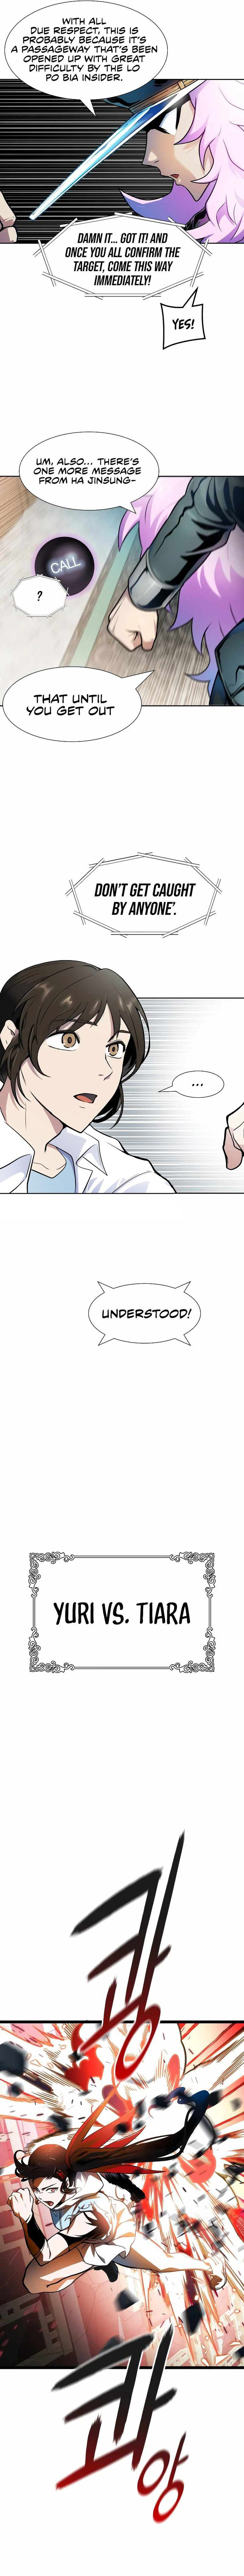 Tower Of God 570 19